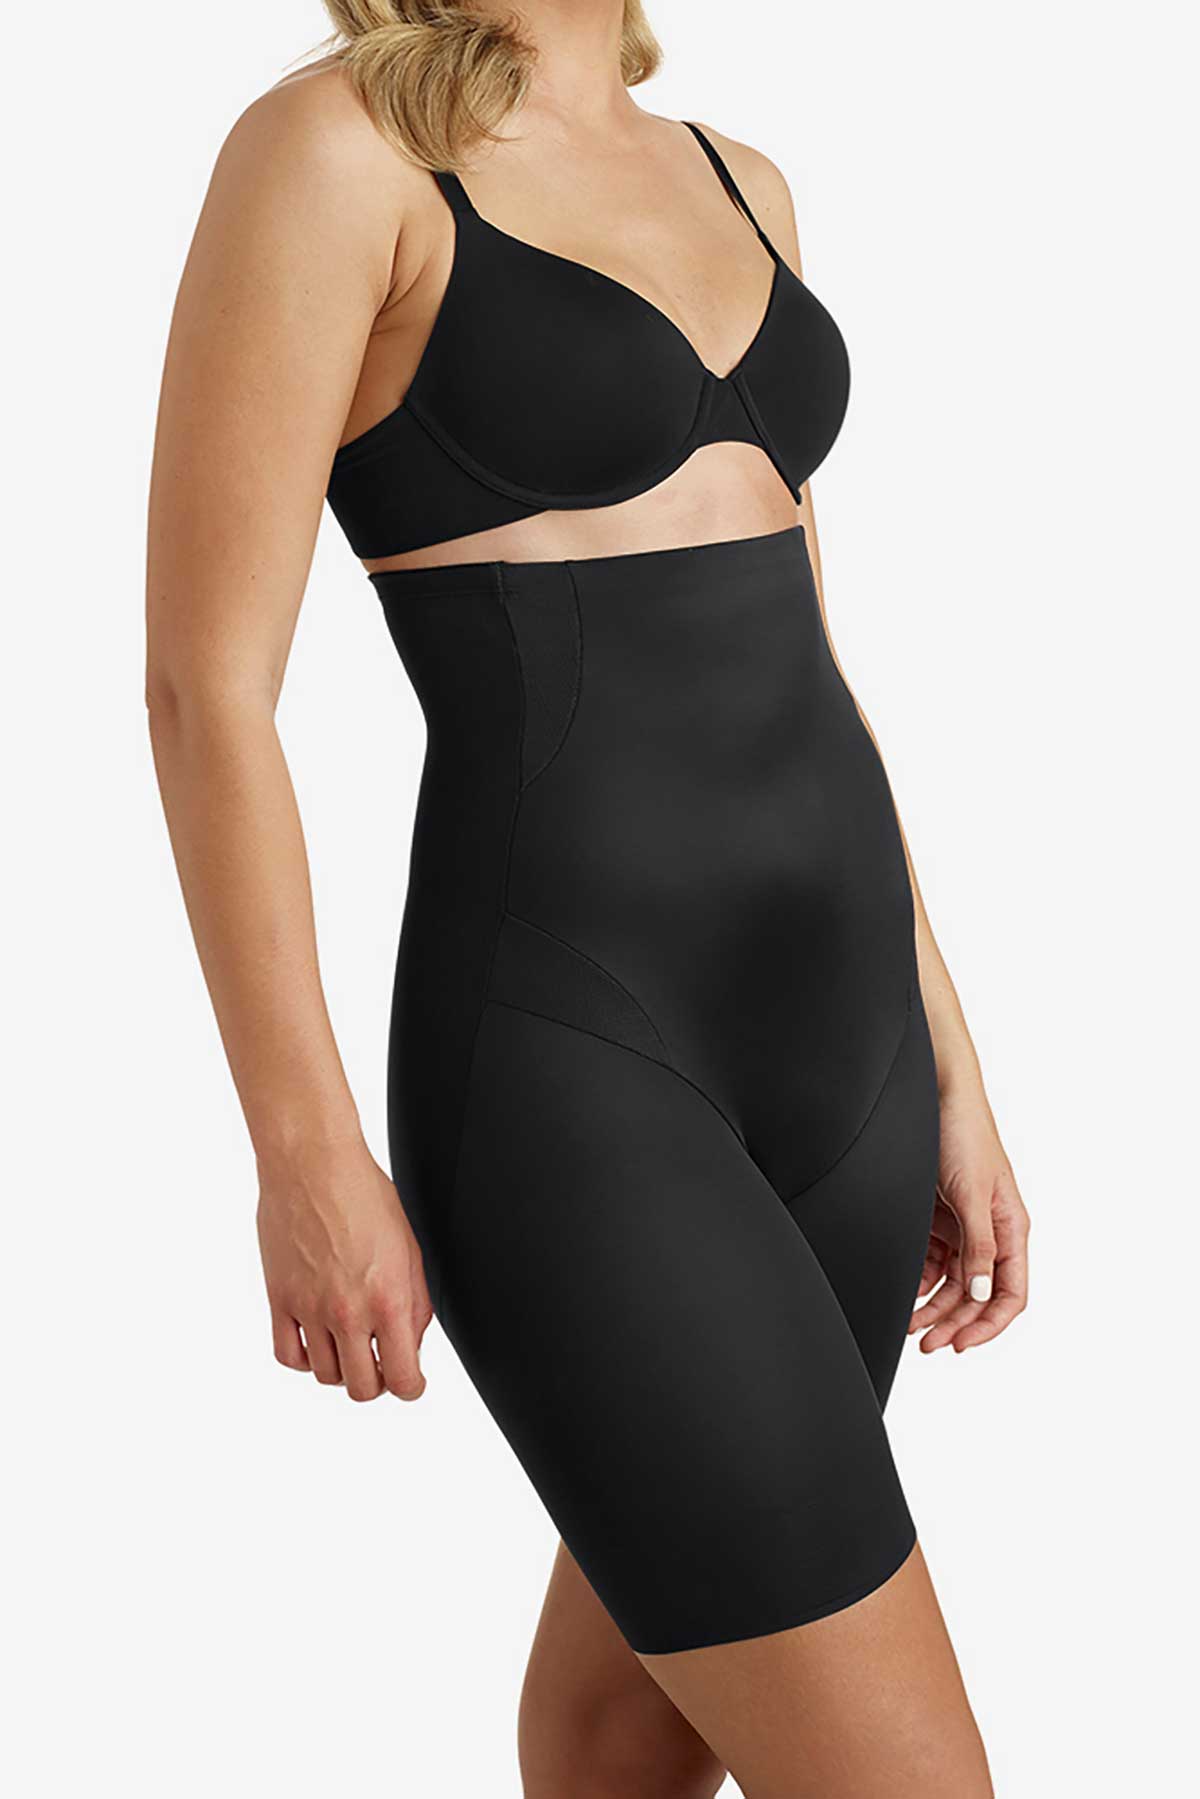 Slim Shaper by Miracle Brands Womens Sheer High Waist Brief Black 22415  Size L for sale online